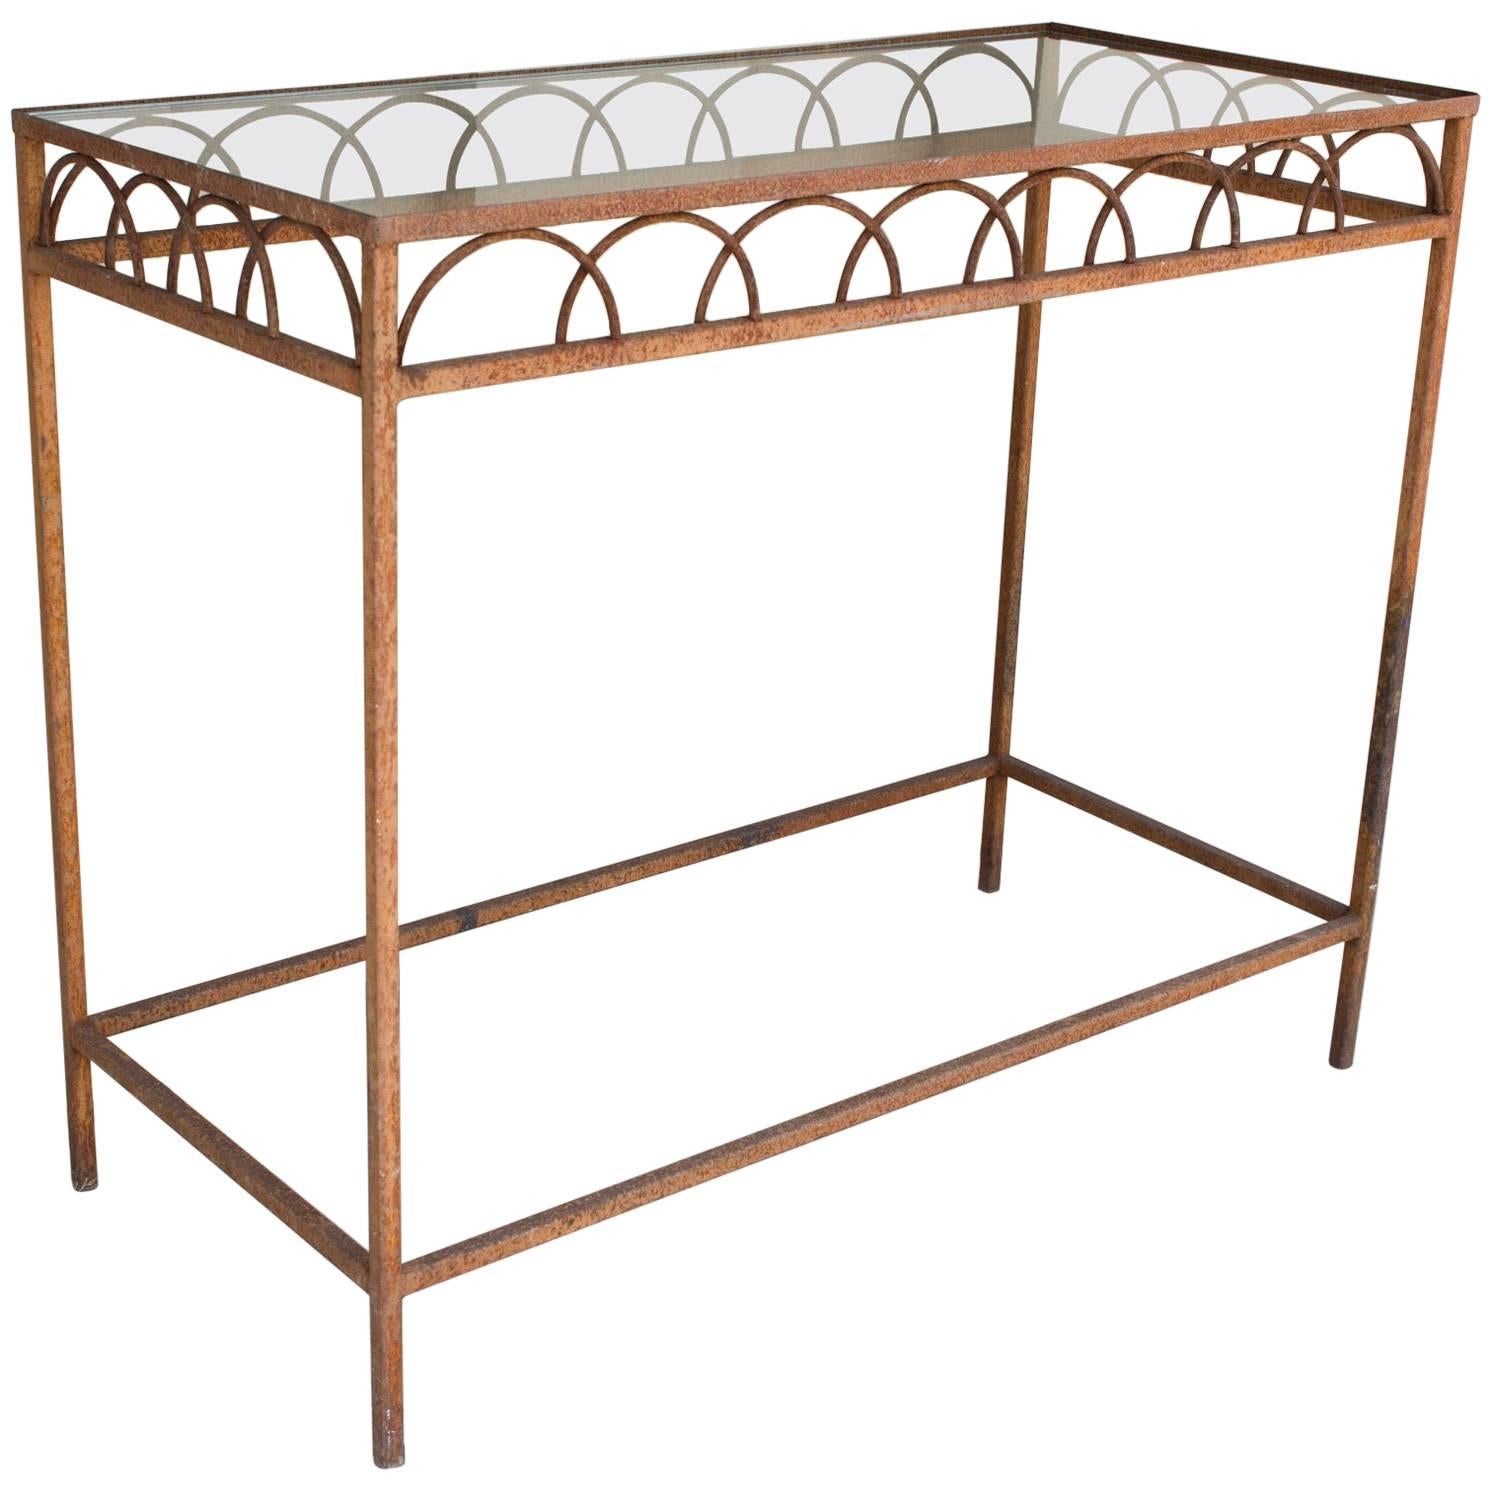 Antique French Iron & Glass Bar Height Console Table from a Parisian Flower Shop